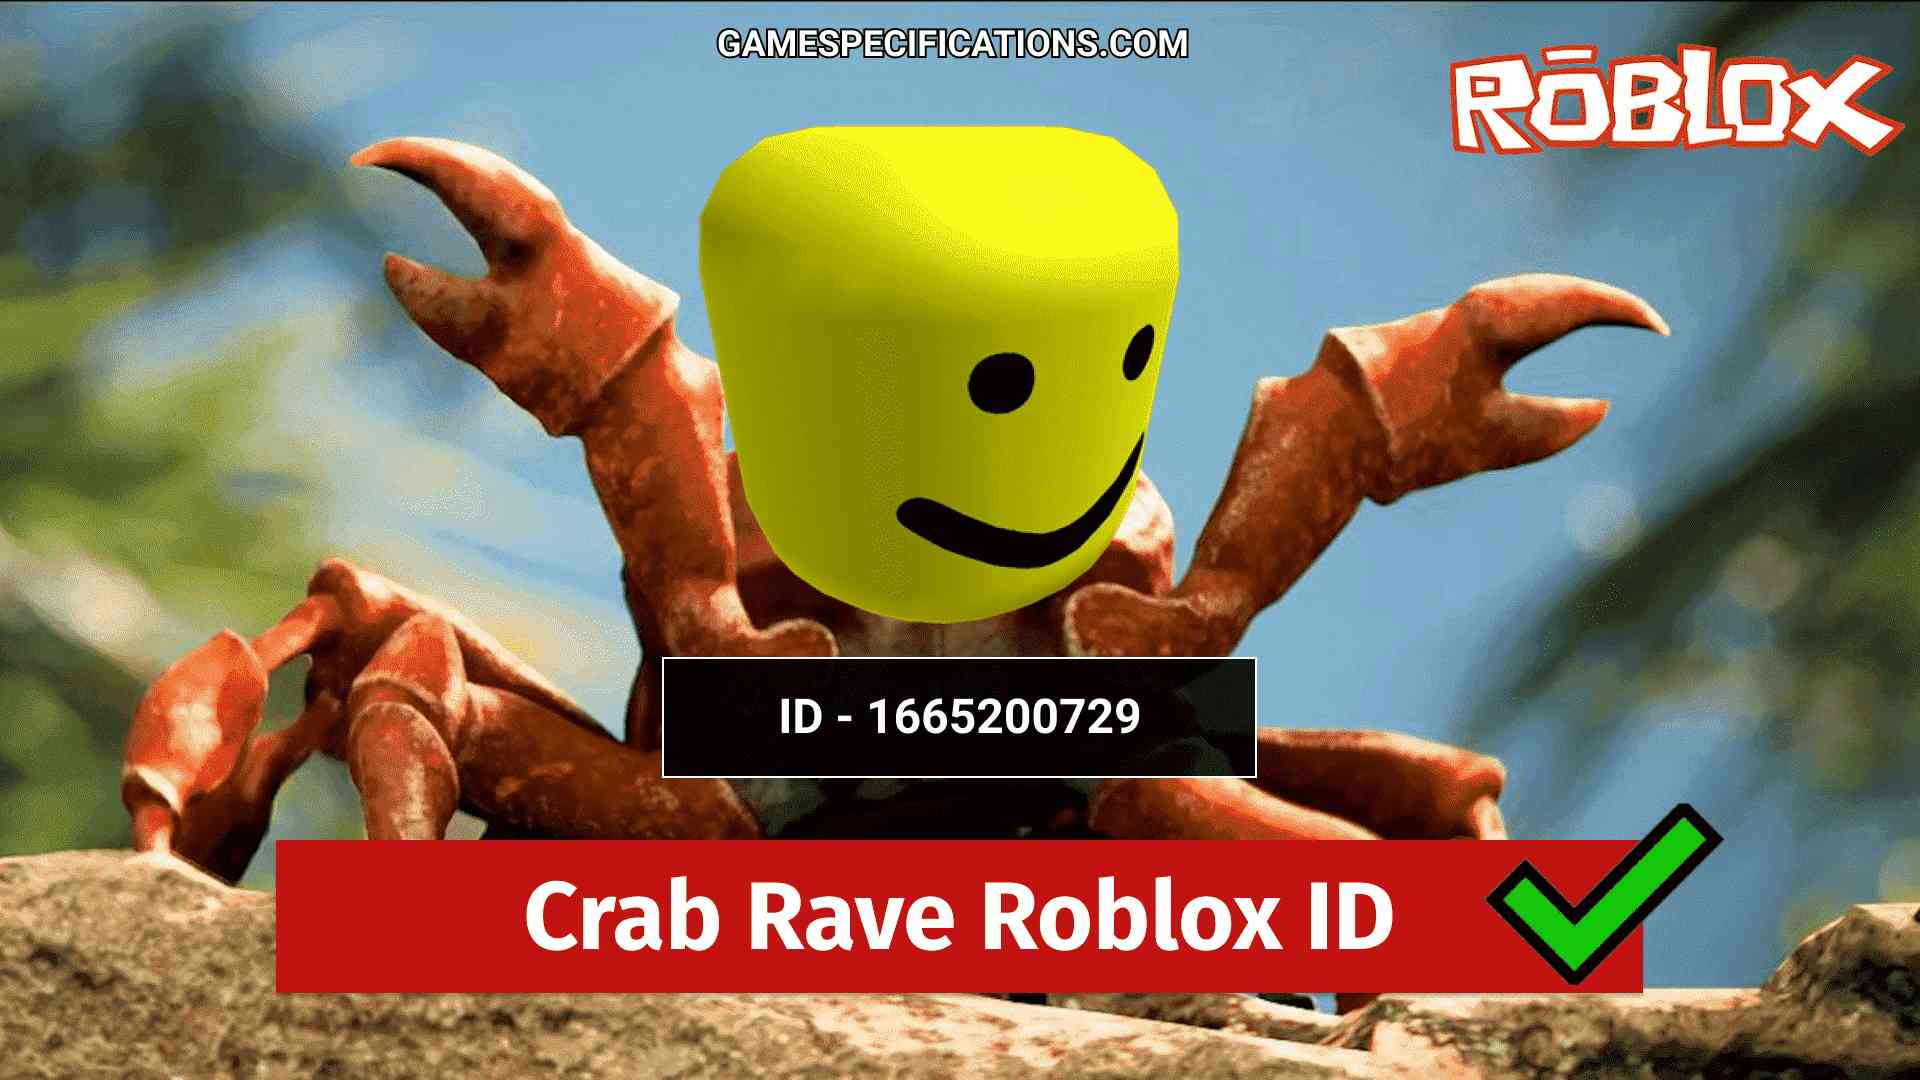 10 Best Crab Rave Roblox Id Codes Parody Remix Included Game Specifications - oof roblox audio